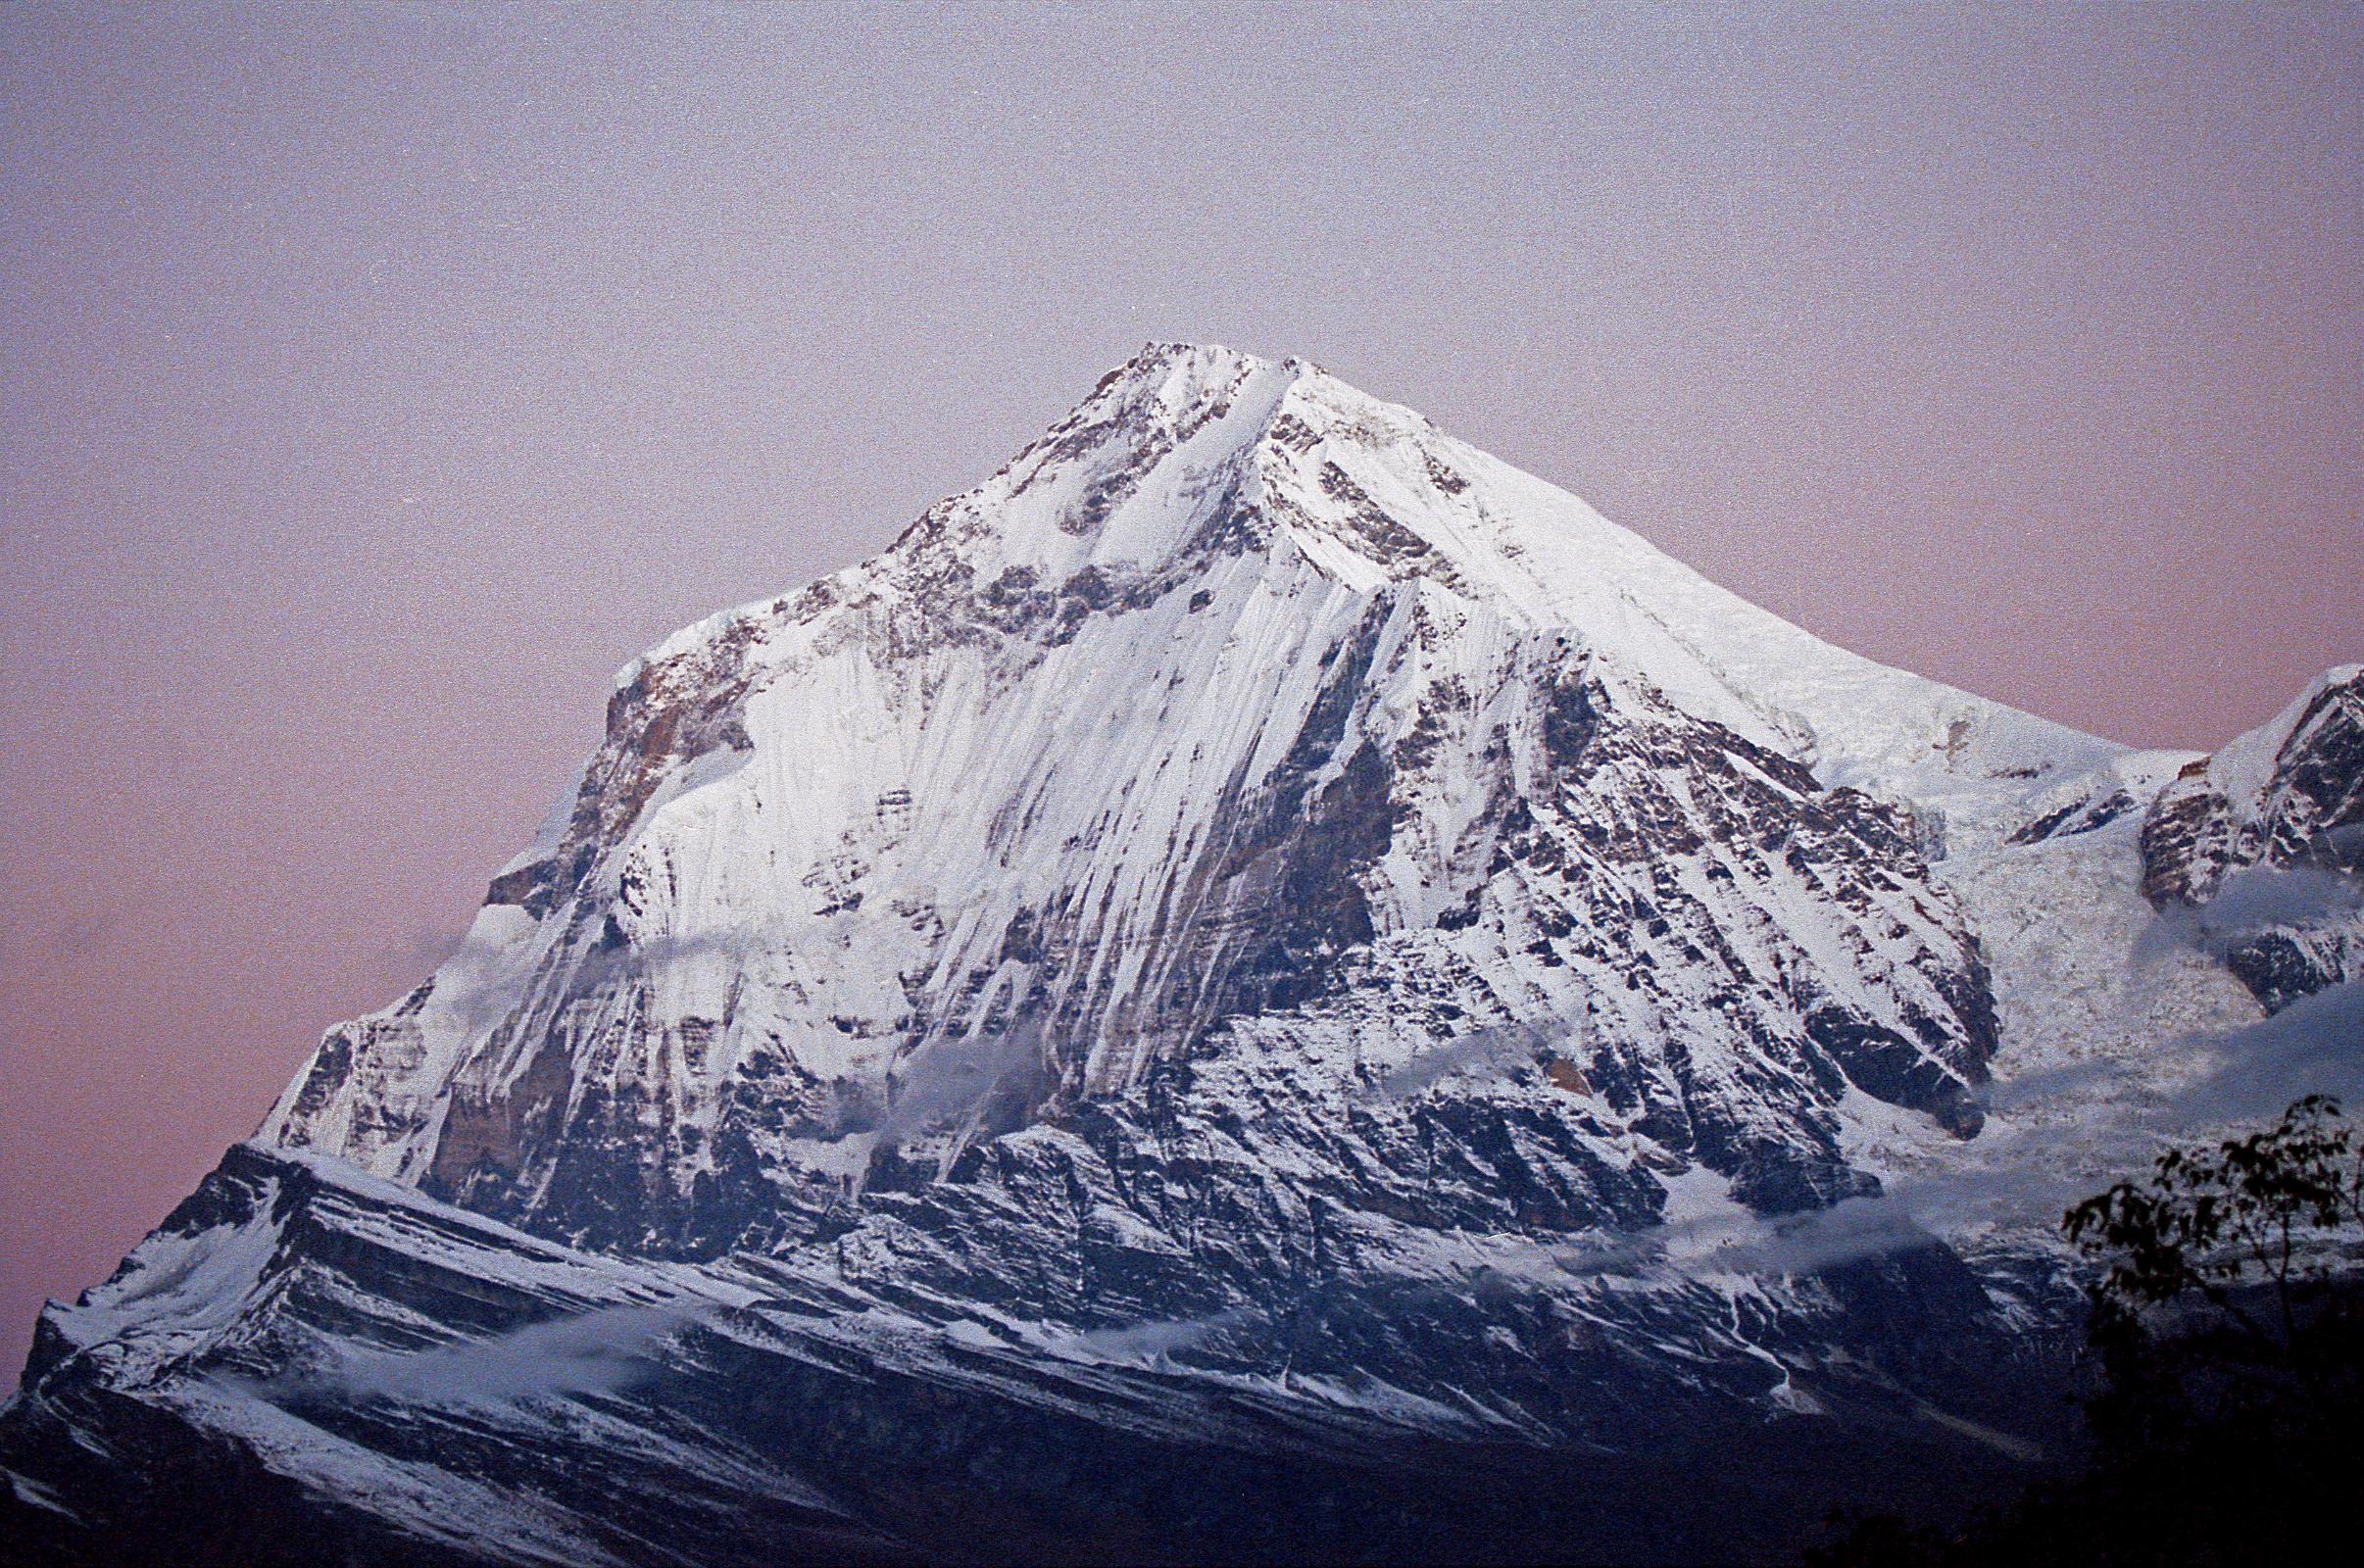 201 Dhaulagiri Just Before Sunrise Dhaulagiri close up in the rose coloured light just before sunrise from Shepherds Kharka (3760m) on the way to Annapurna North Base Camp.